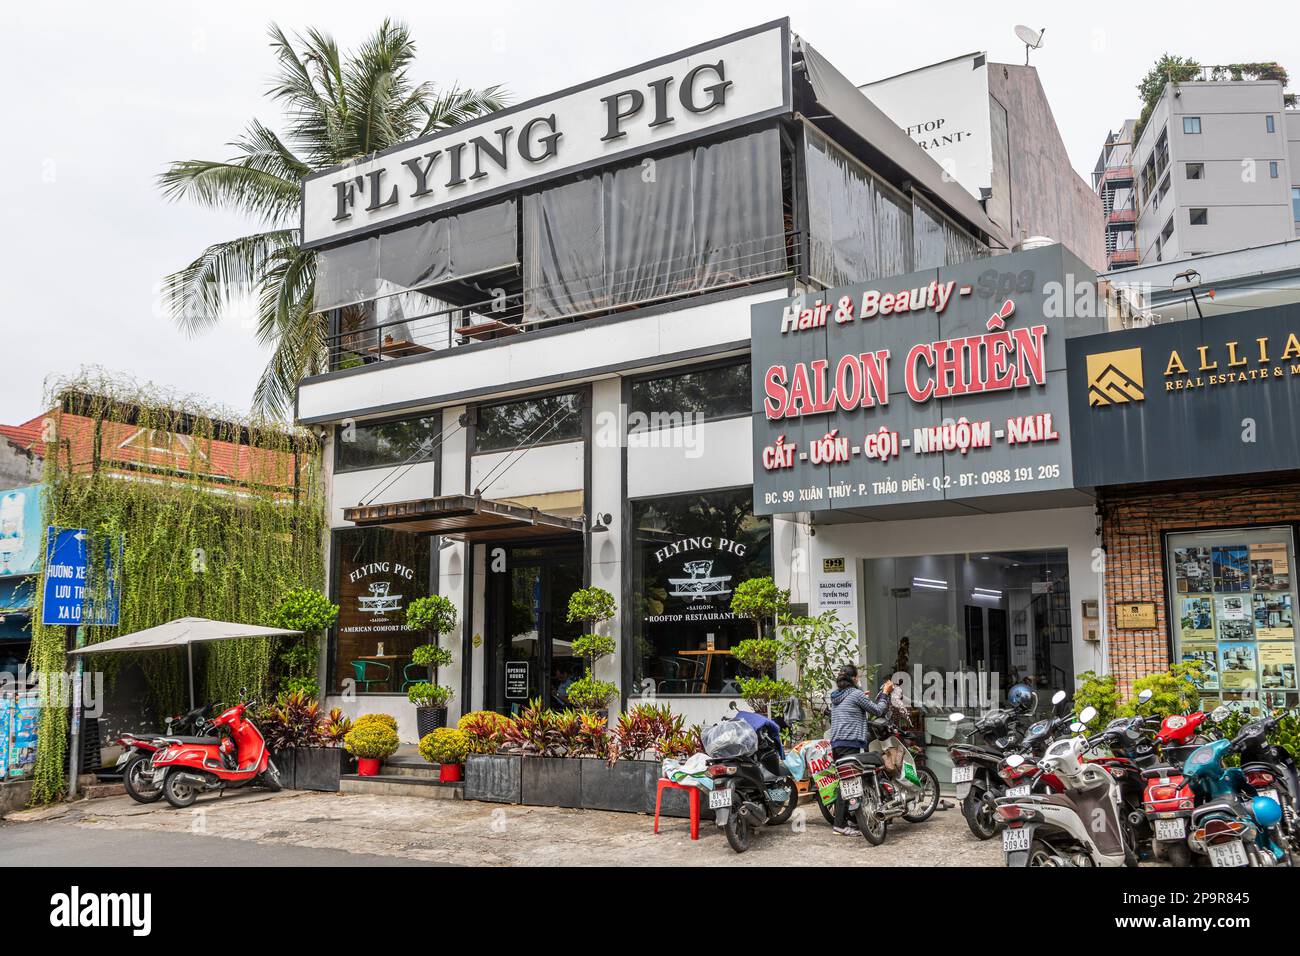 The Flying Pig pub on Xuan Thuy, District 2, ho Chi Minh City, Vietnam. Foto Stock